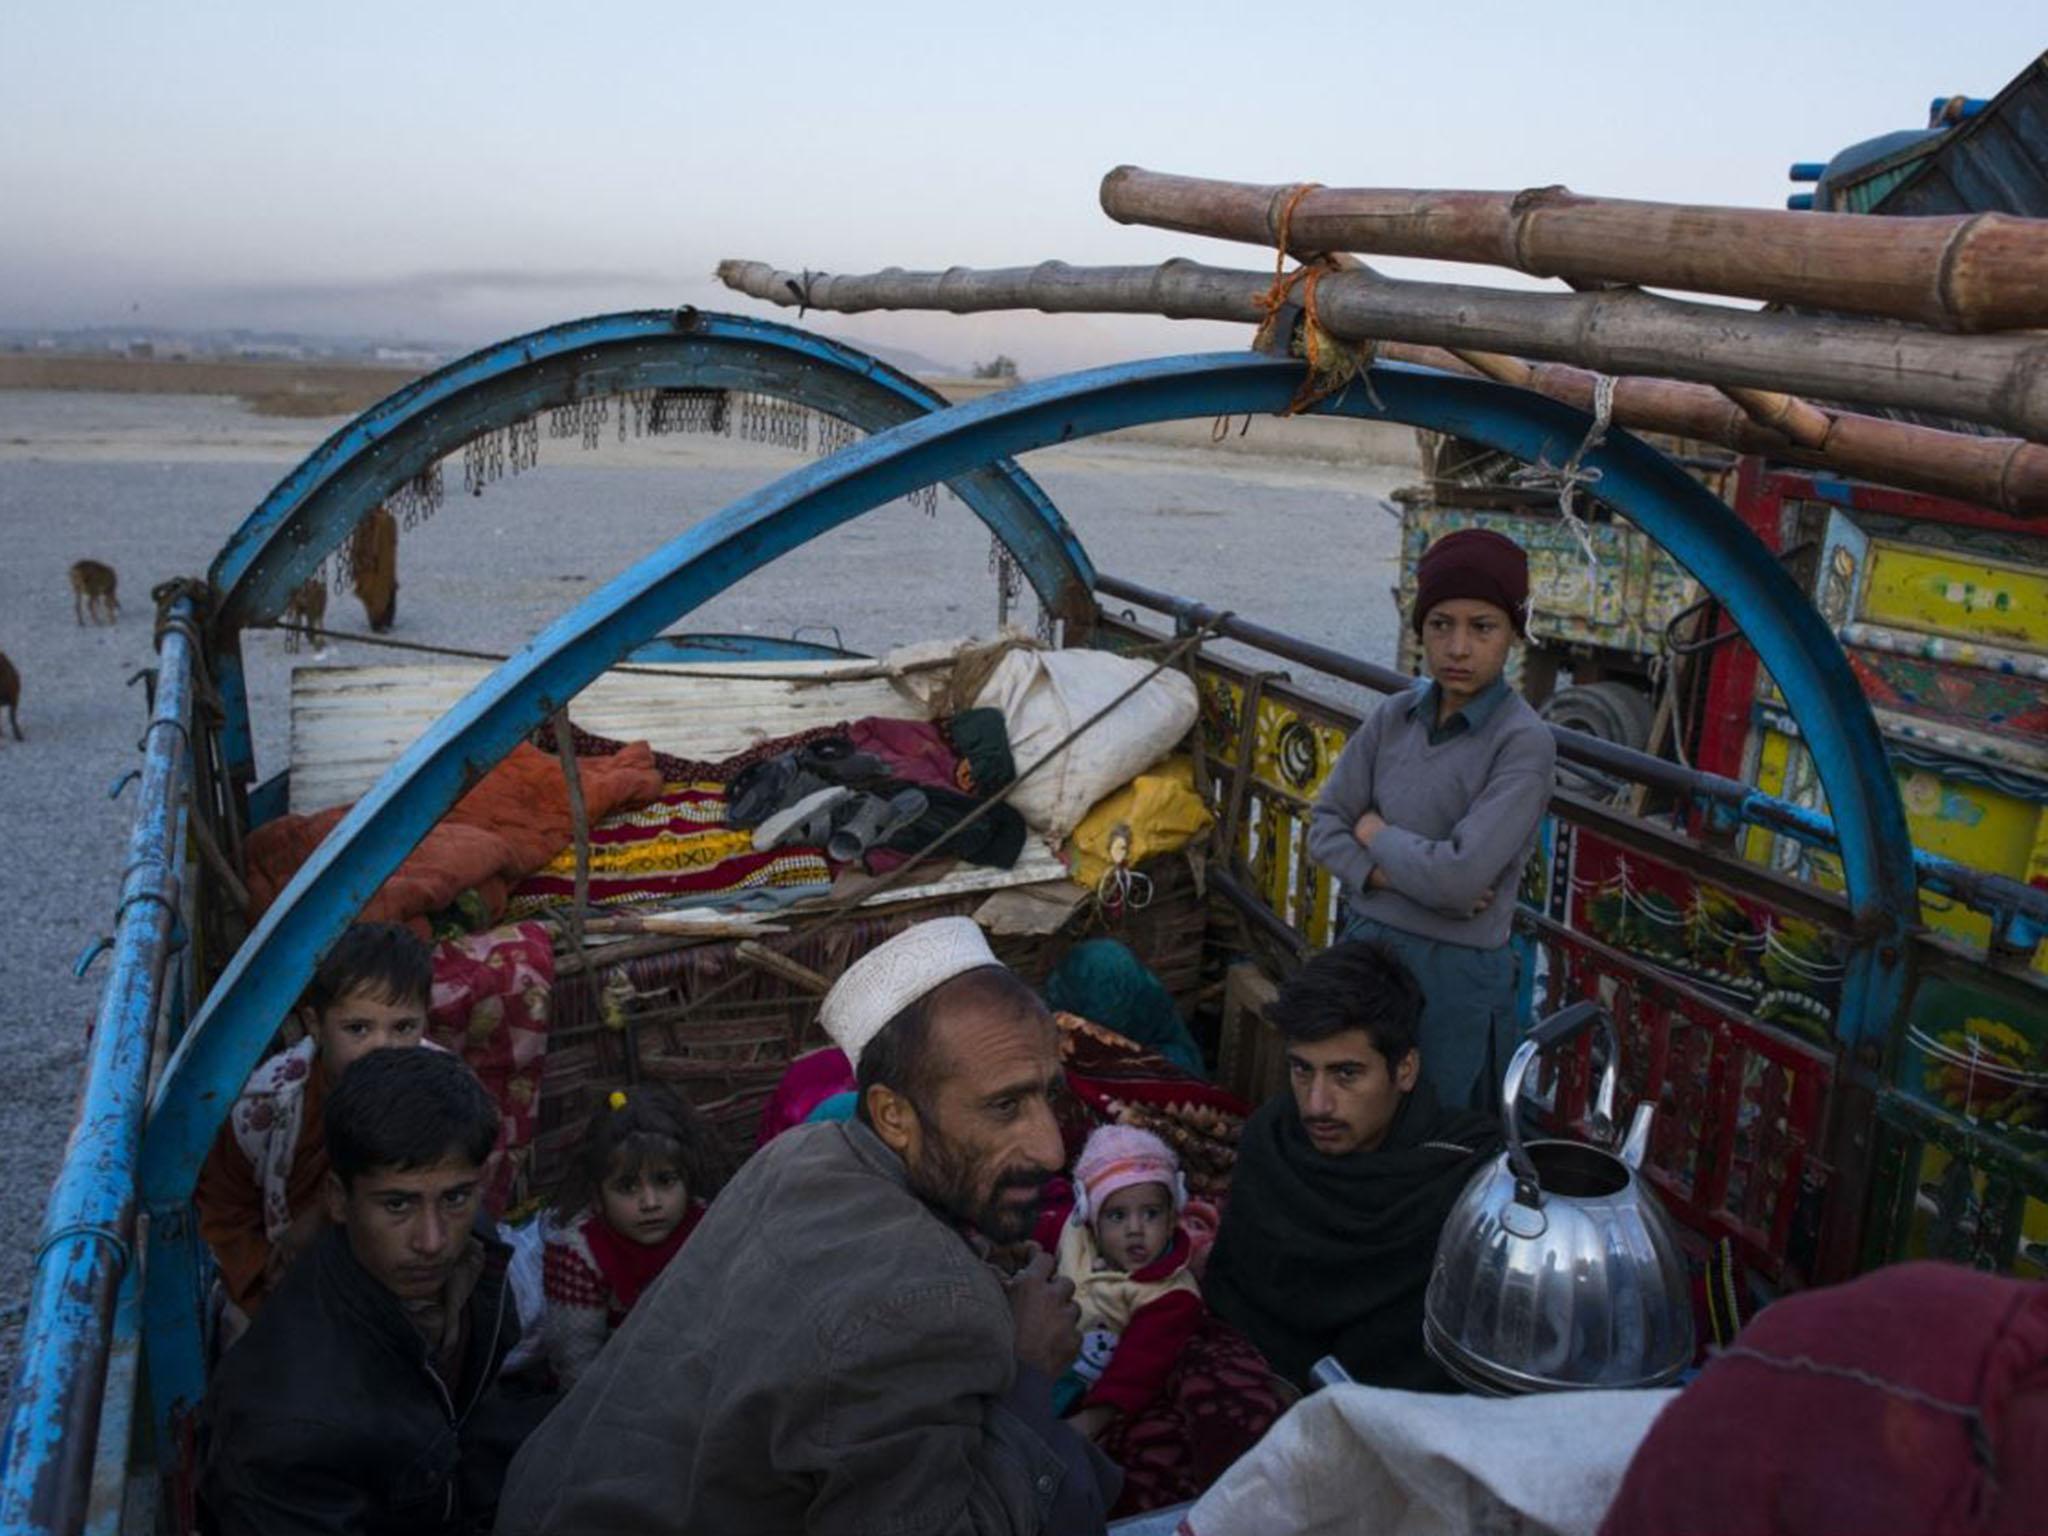 After driving from Pakistan the previous day to a UN ‘encashment’ centre on the outskirts of Kabul, a family of Afghans wake up at dawn and boil tea after a night sleeping on top of the trucks that carried them (Washington Post)